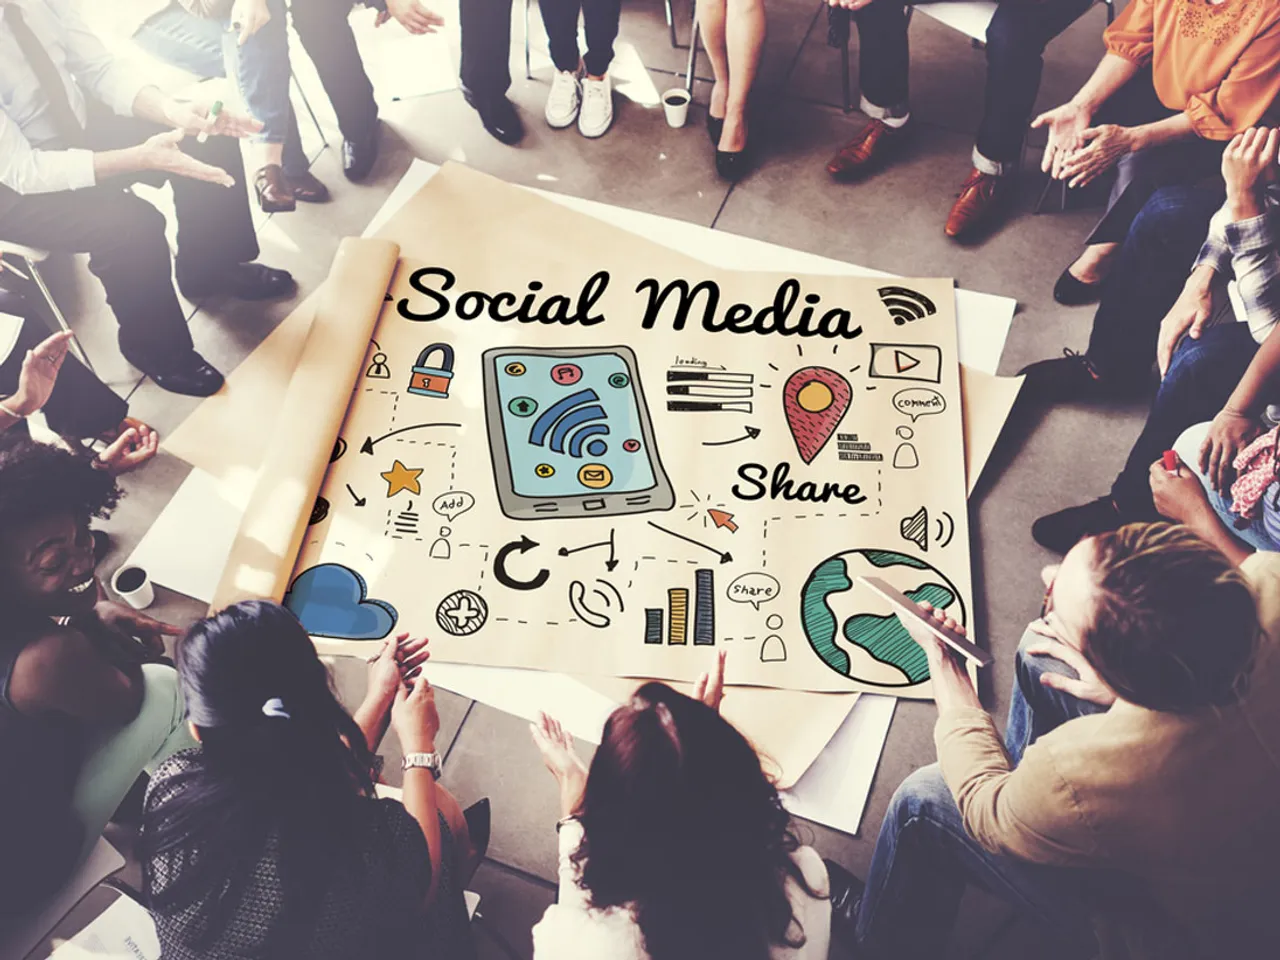 Creating a social media footprint from scratch for start-ups